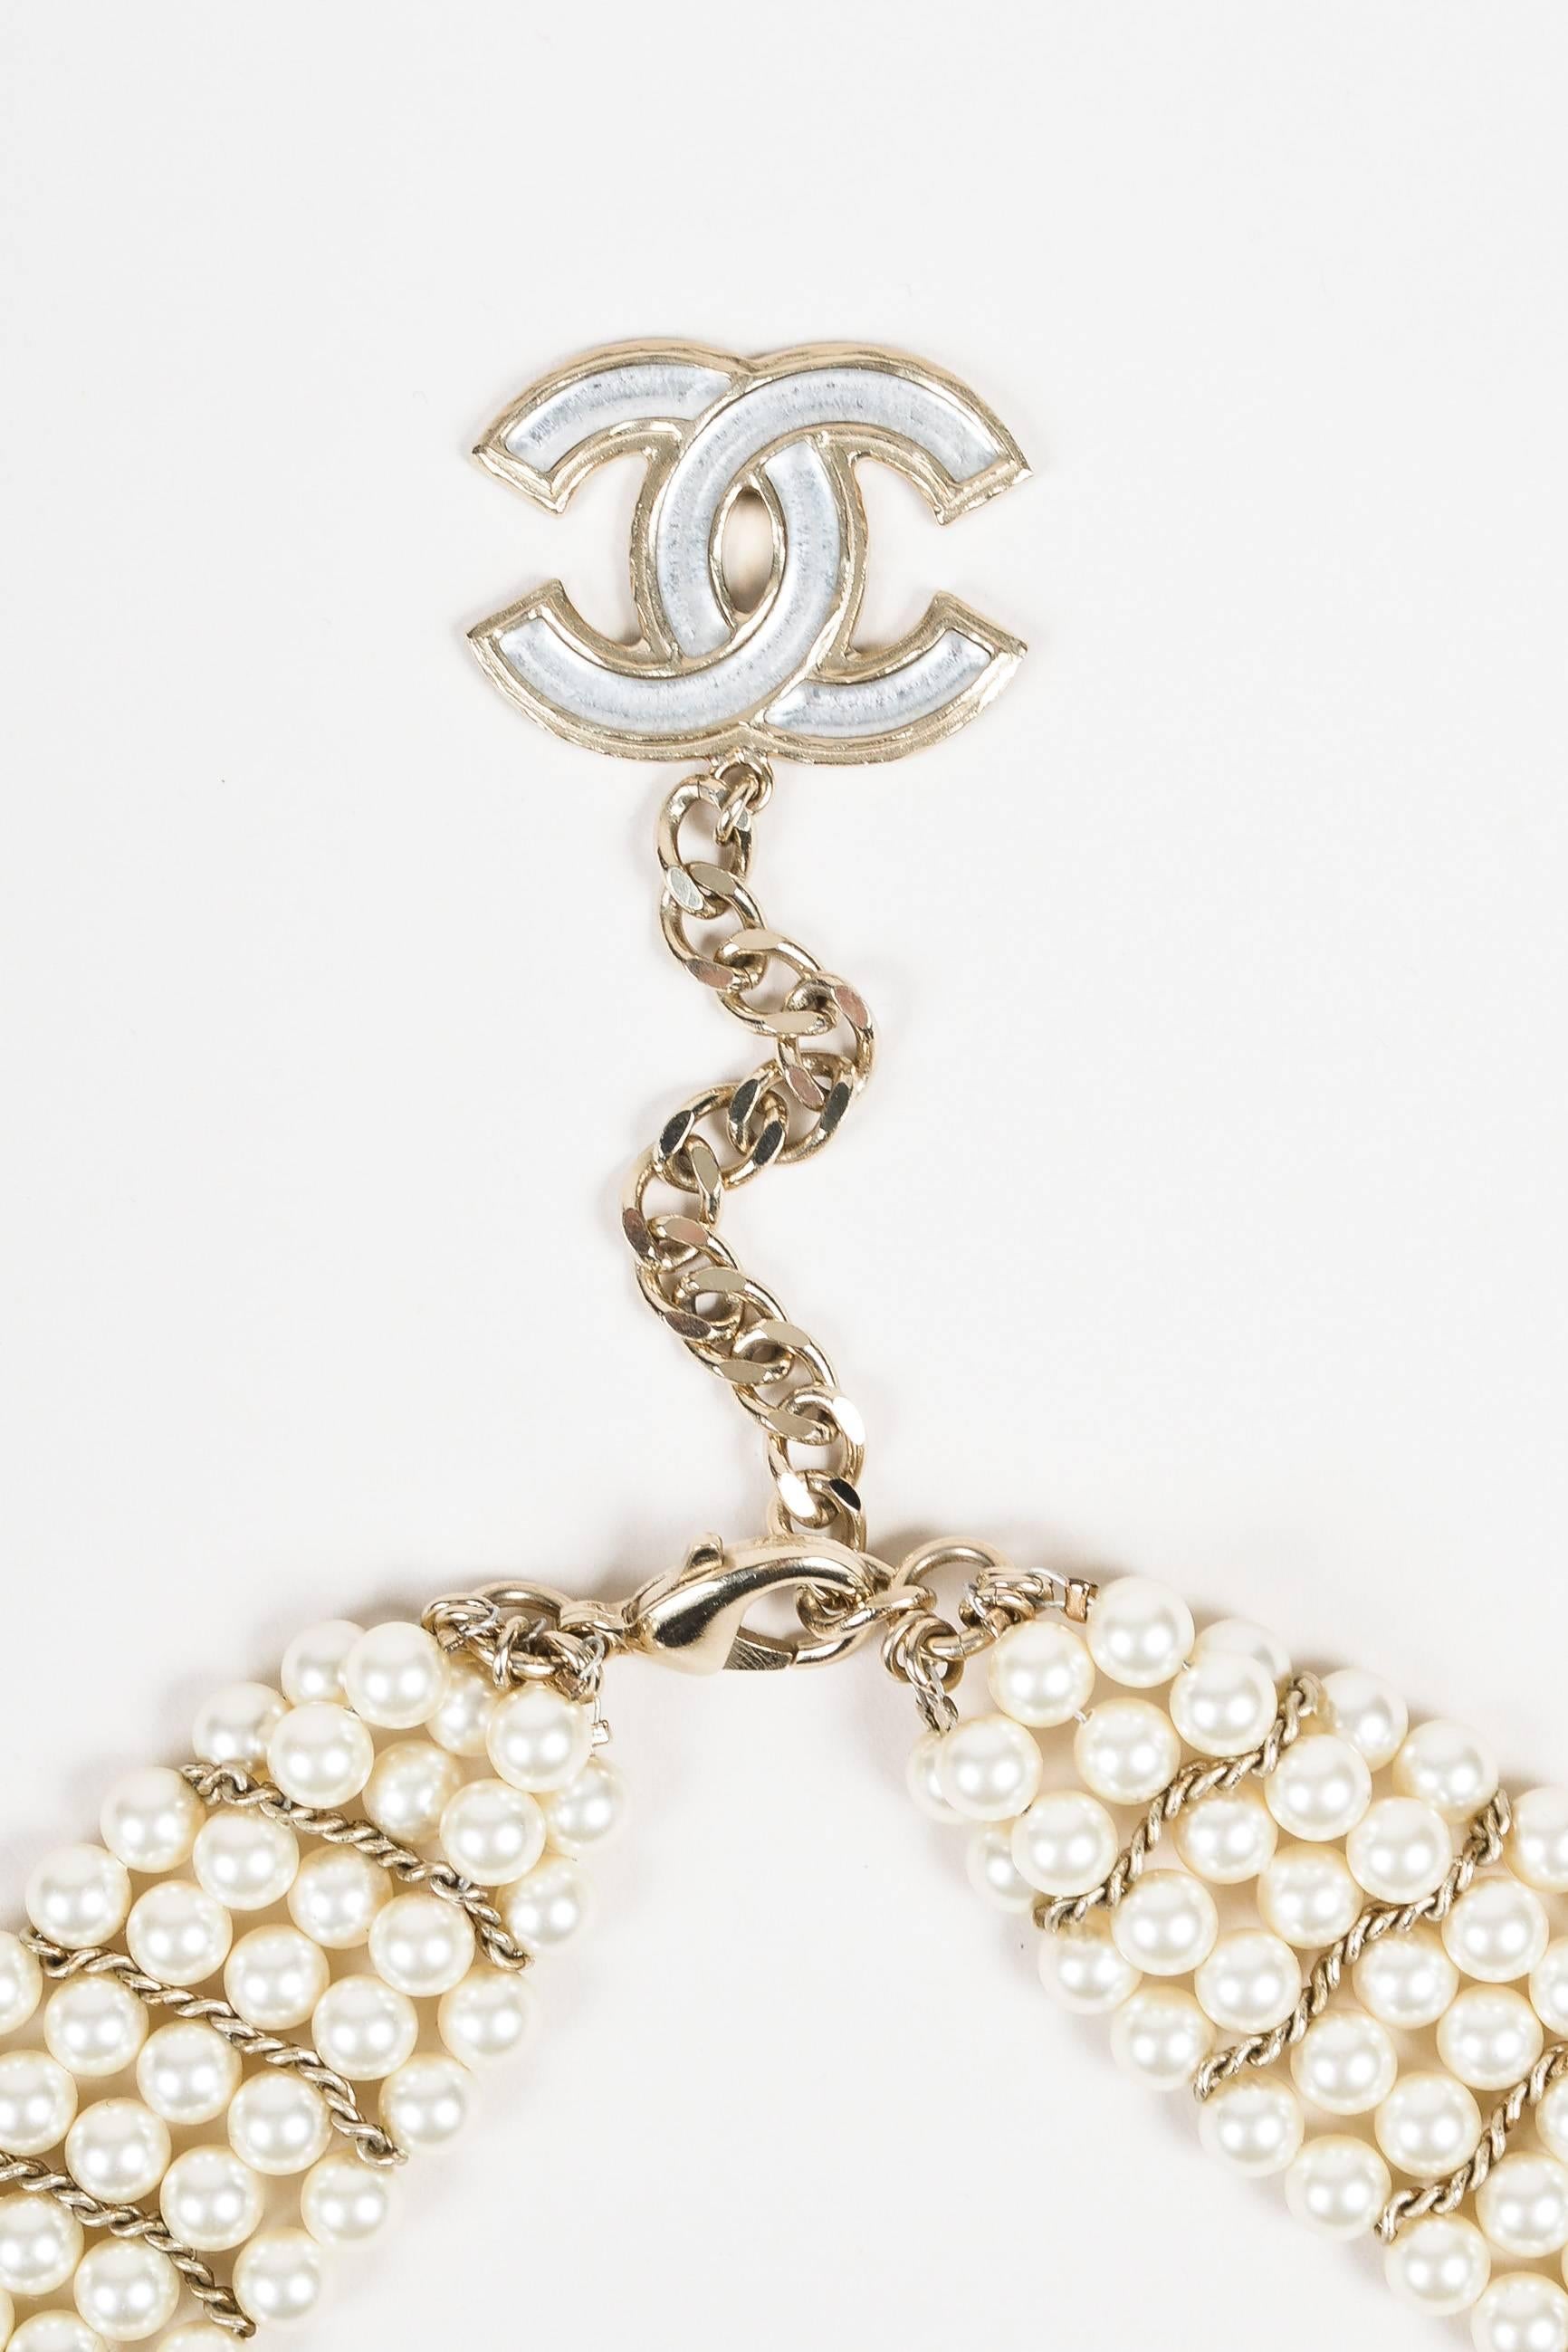 Chanel 12A Gold Tone Faux Pearl Glass Stone 'CC' Flower Pedant Bib Necklace In Good Condition For Sale In Chicago, IL